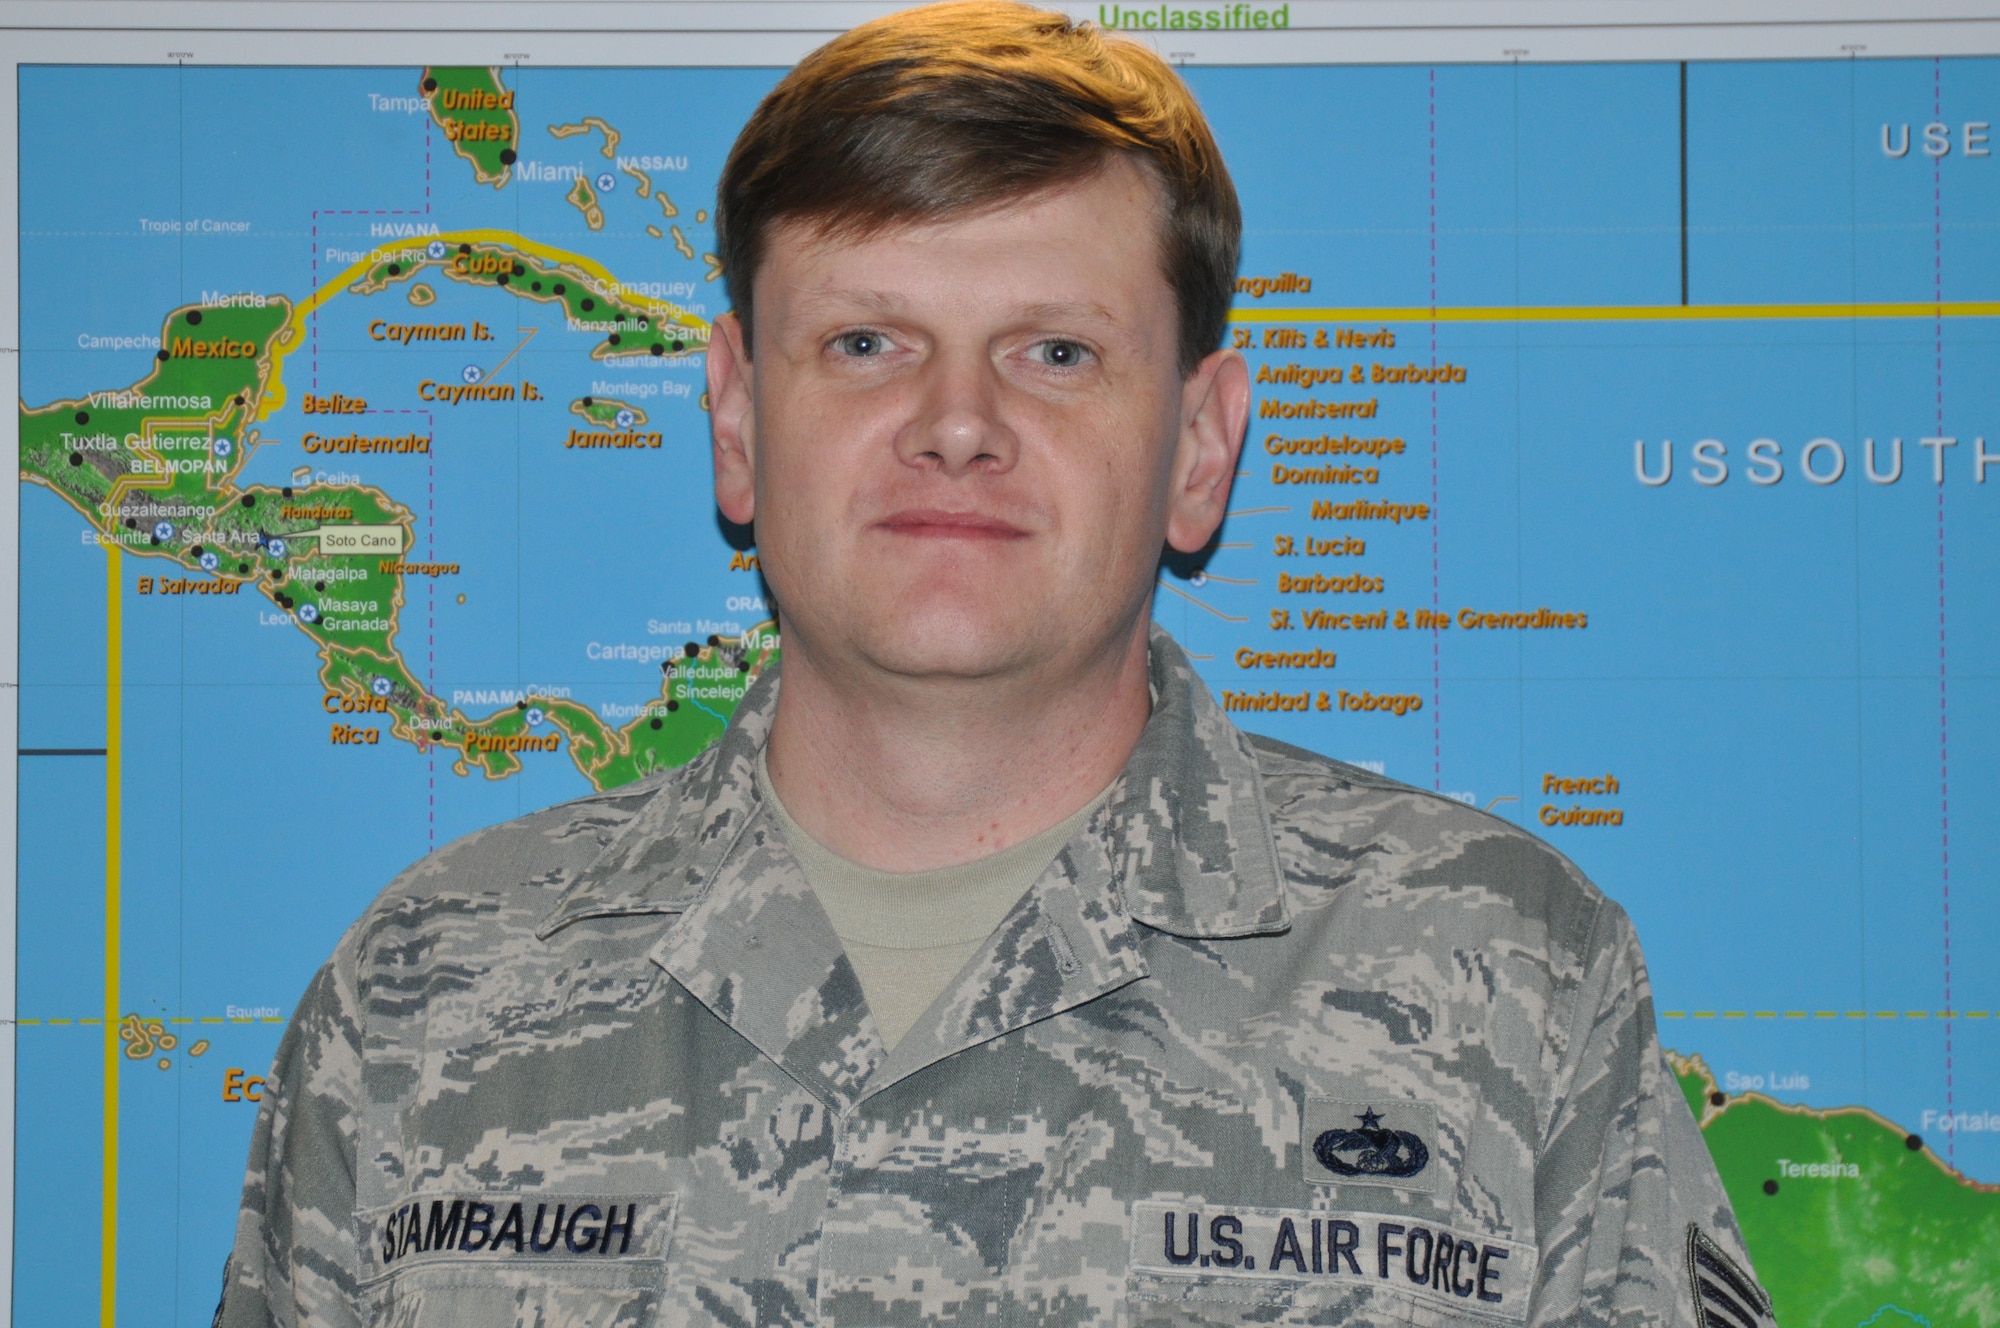 “My job in the Blue Flag exercise is to move equipment from base-to-base and to respond to emergency logistical support in our area of responsibility,” said Tech. Sgt. Scott Stambaugh, 12th Air Force (Air Forces Southern) logistics manager. (U.S. Air Force photo by Master Sgt. Kelly Ogden/Released).